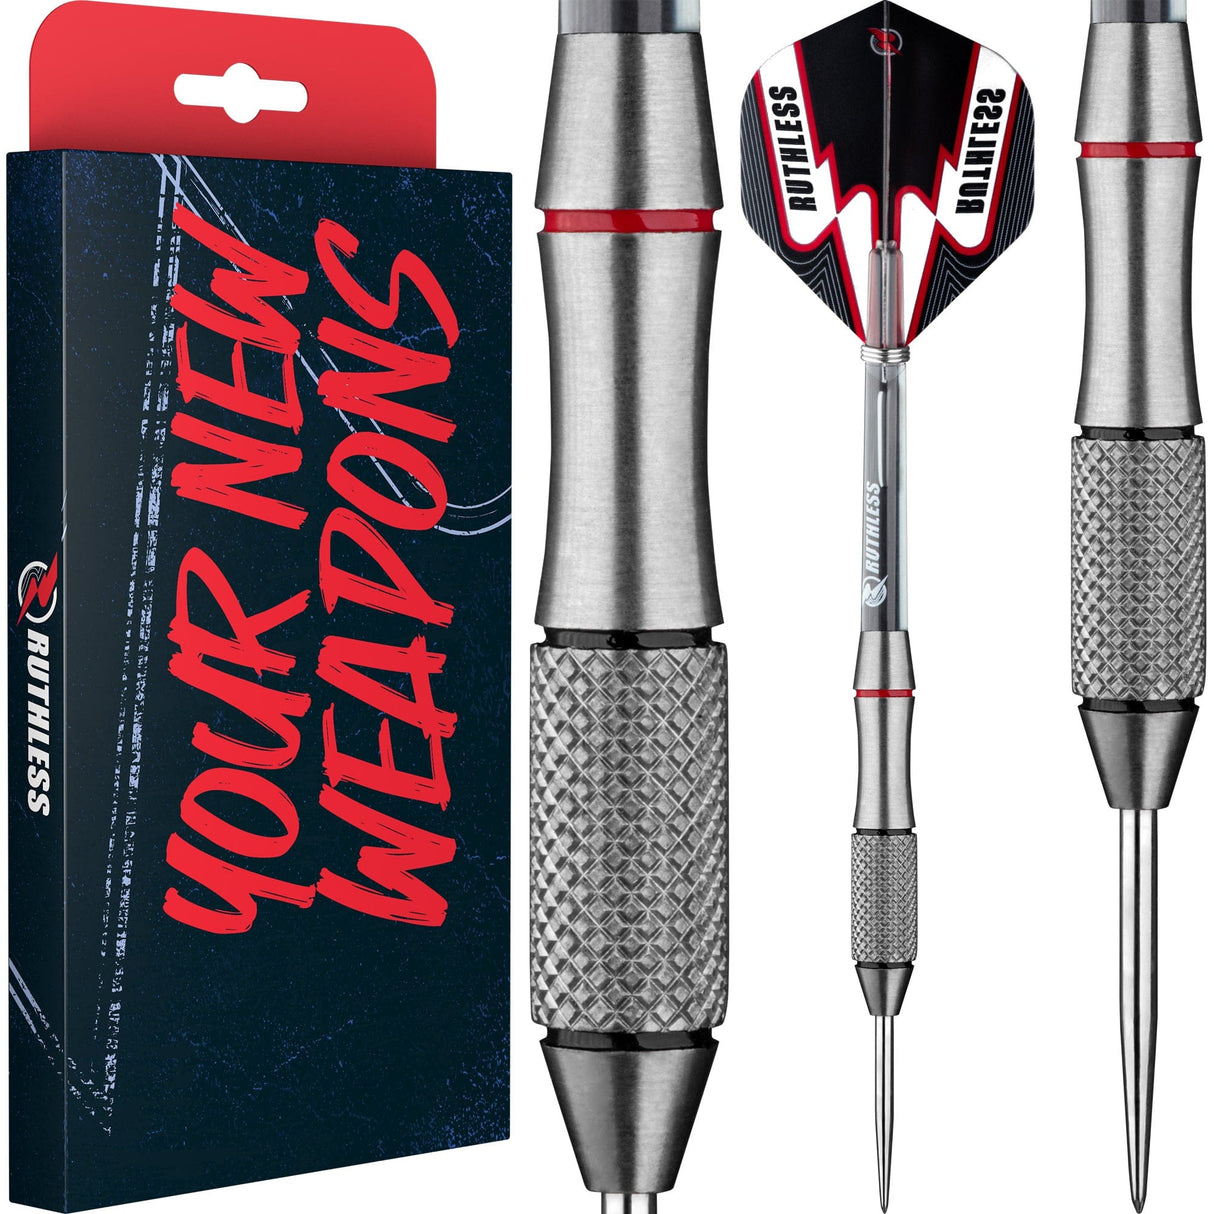 Ruthless Scallop Darts - Steel Tip - Front Knurl - Black & Red - 27g 27g